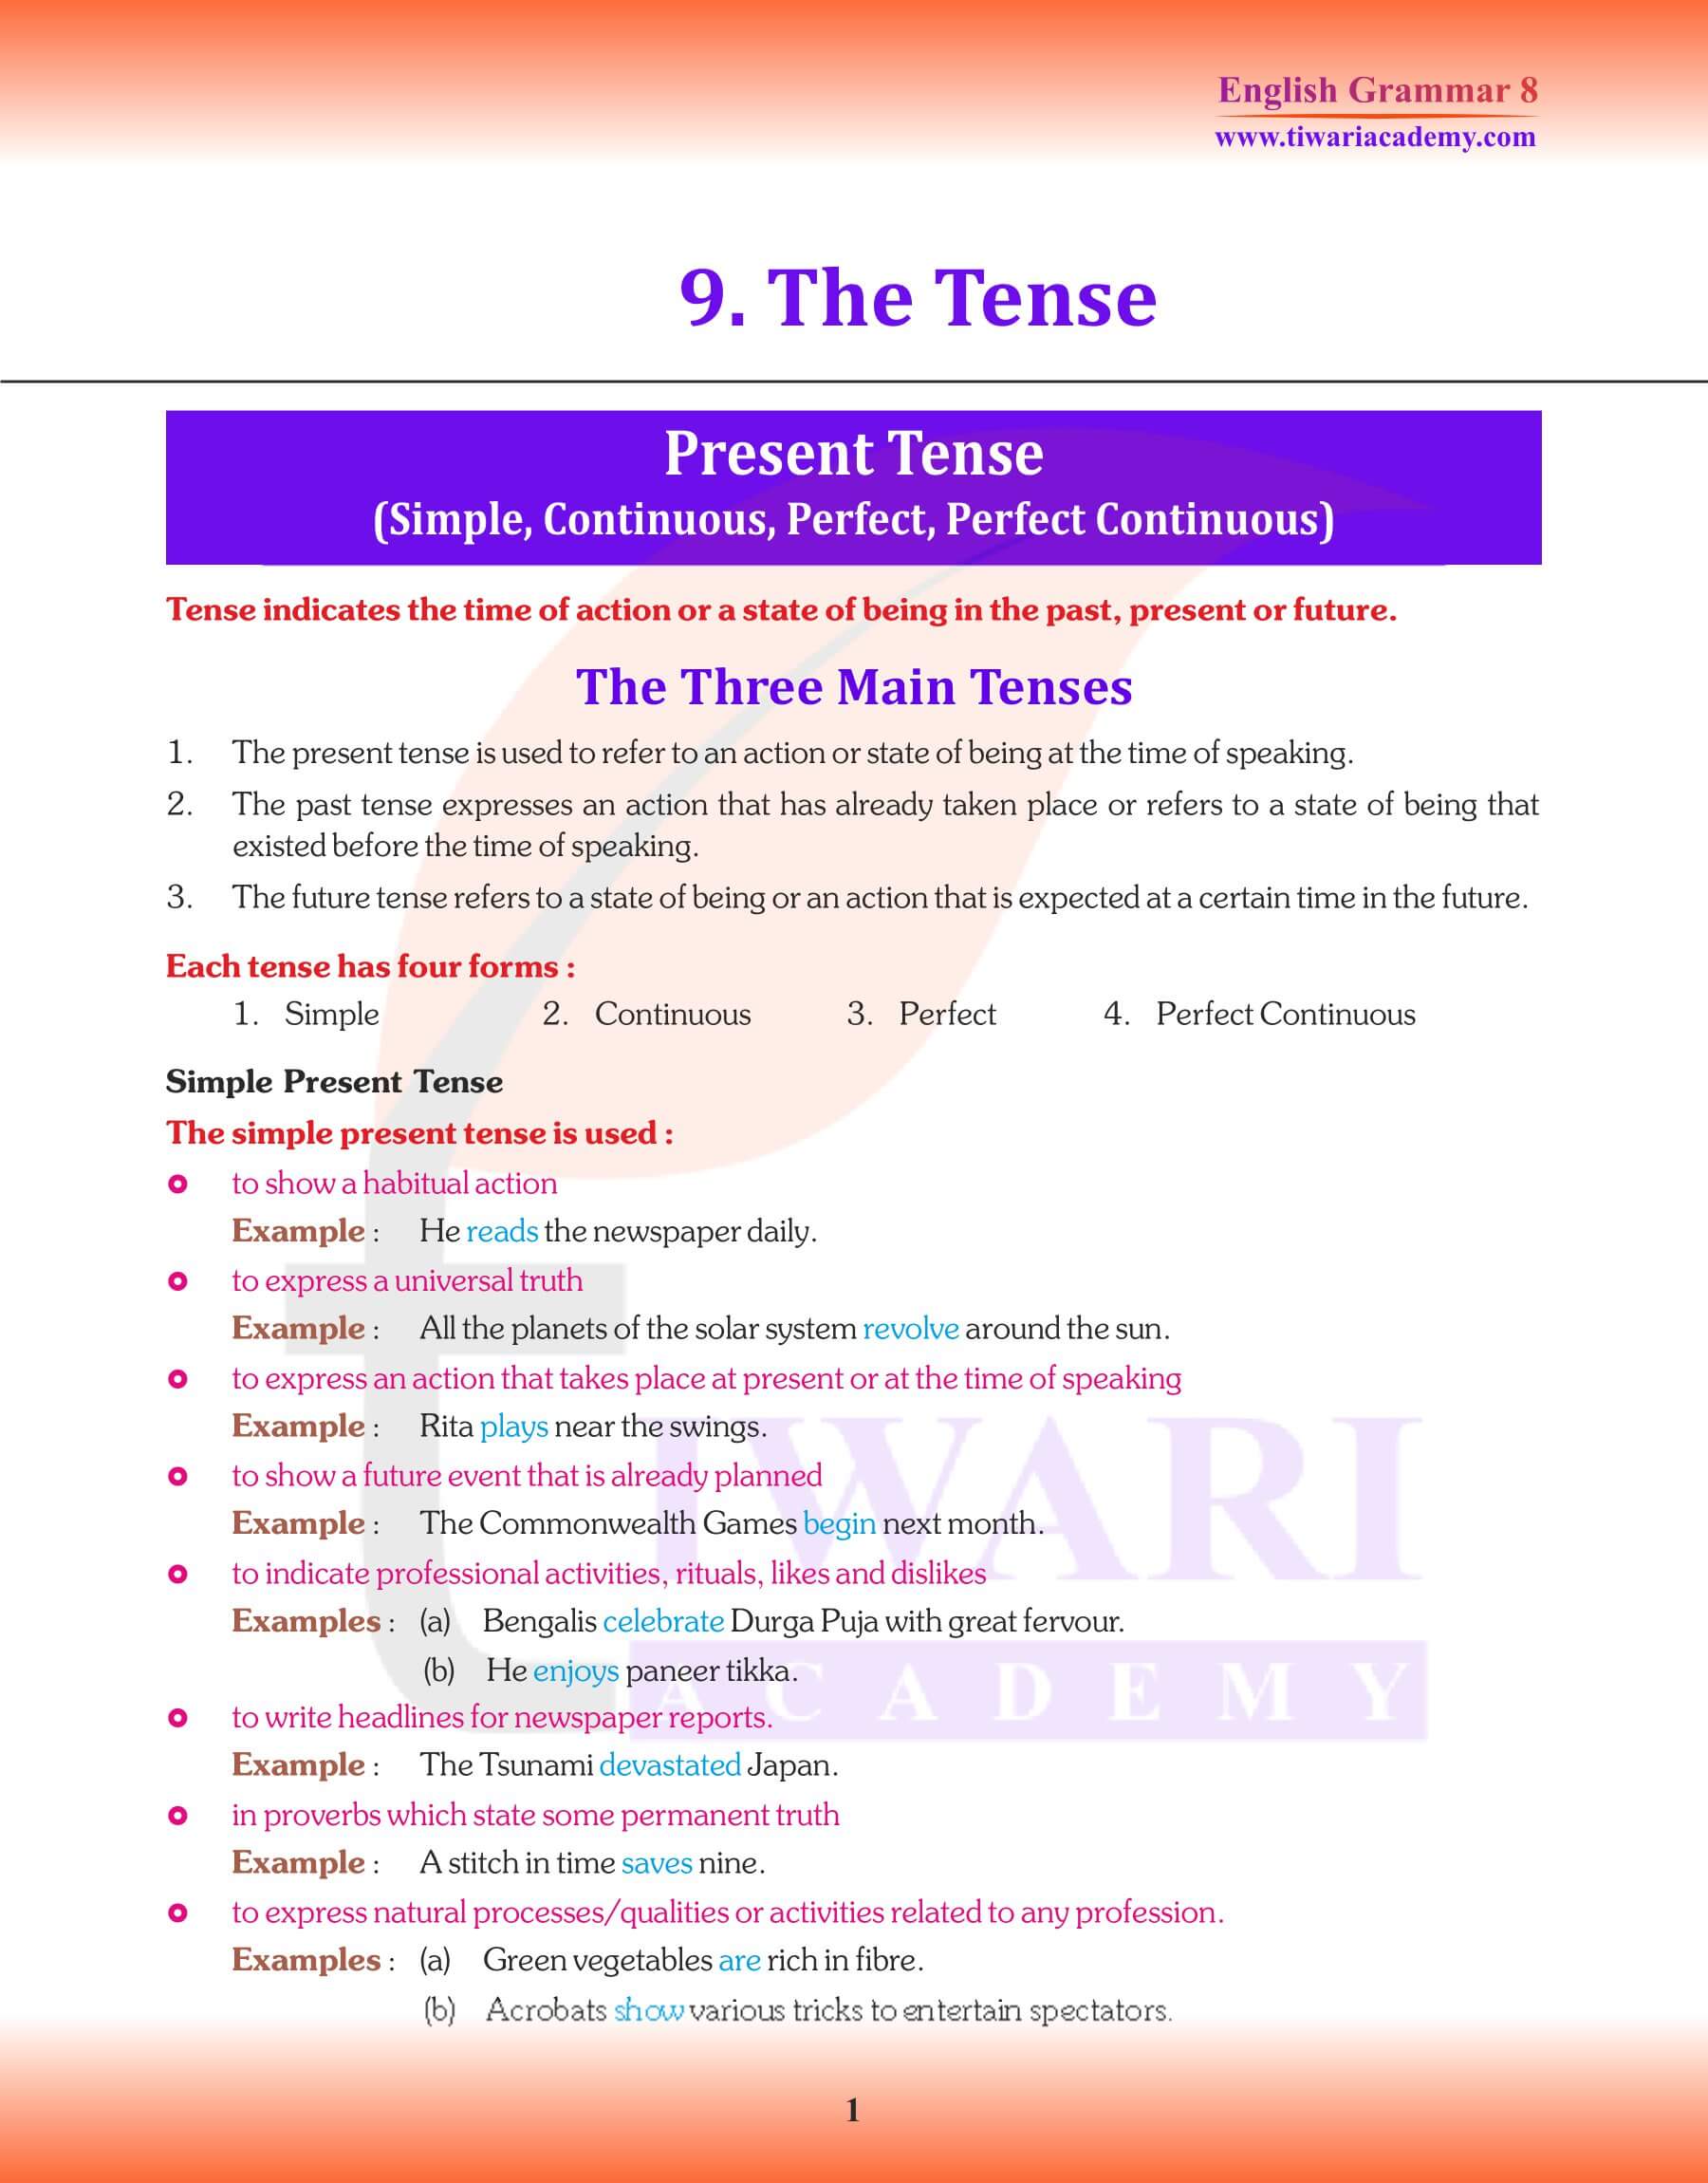 Class 8 English Grammar Chapter 9 The Tense Revision book